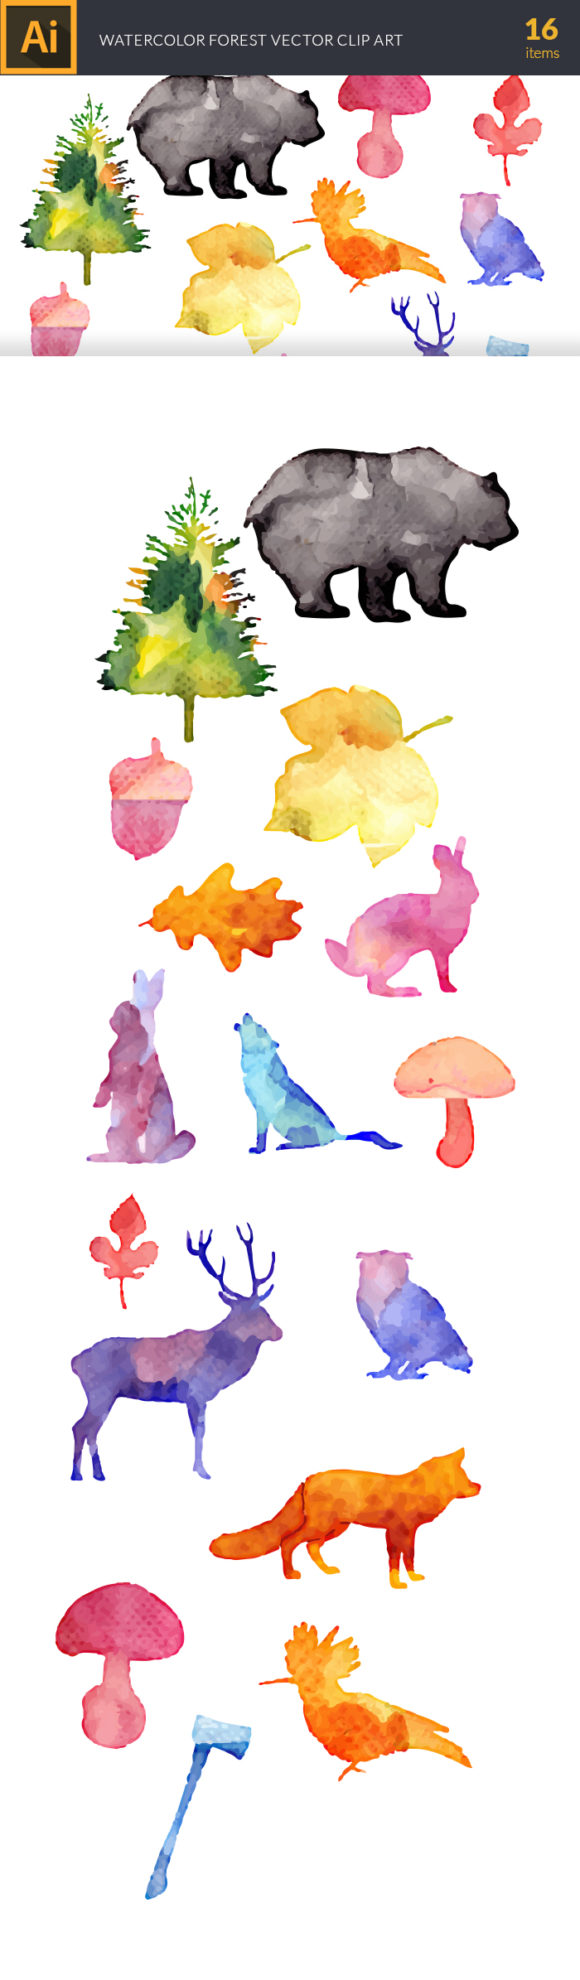 Watercolor Forest Vector Set 2